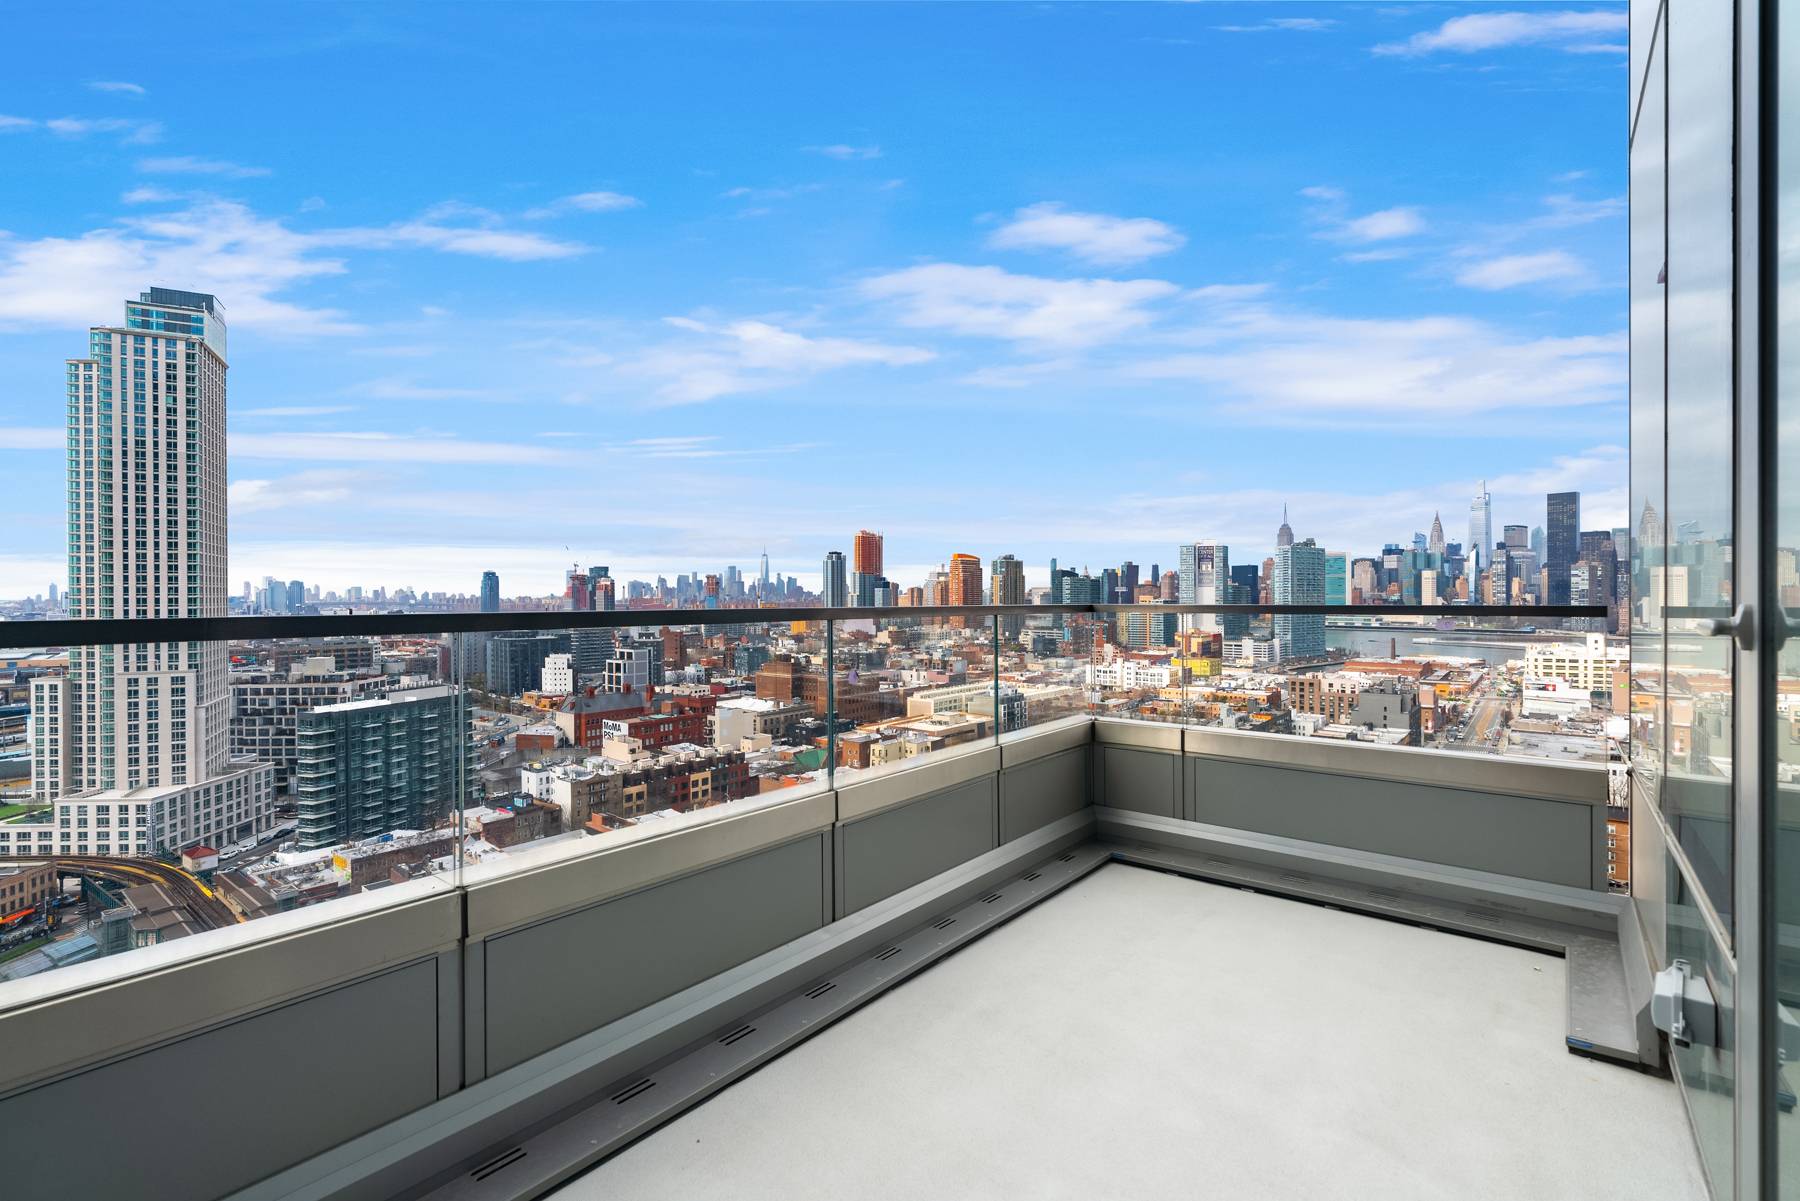 The premiere of Skyline Tower, a breathtaking monumental luxury high rise in the heart of Court Square district in Long Island City with incredible panoramic views of New York City.